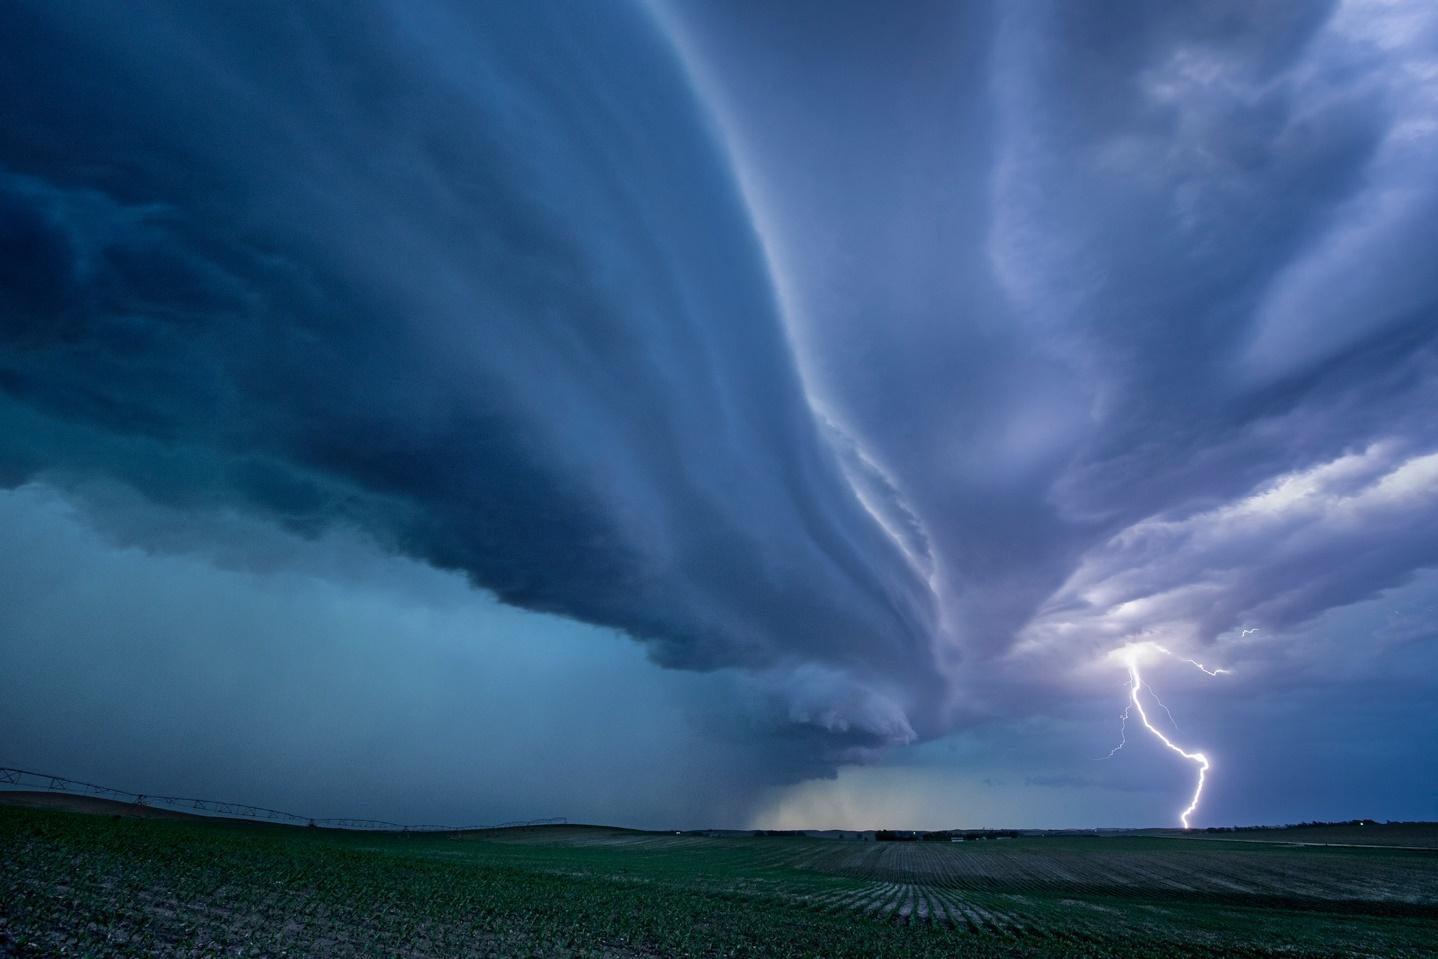 lightning striking beneath a picturesque supercell thunderstorm